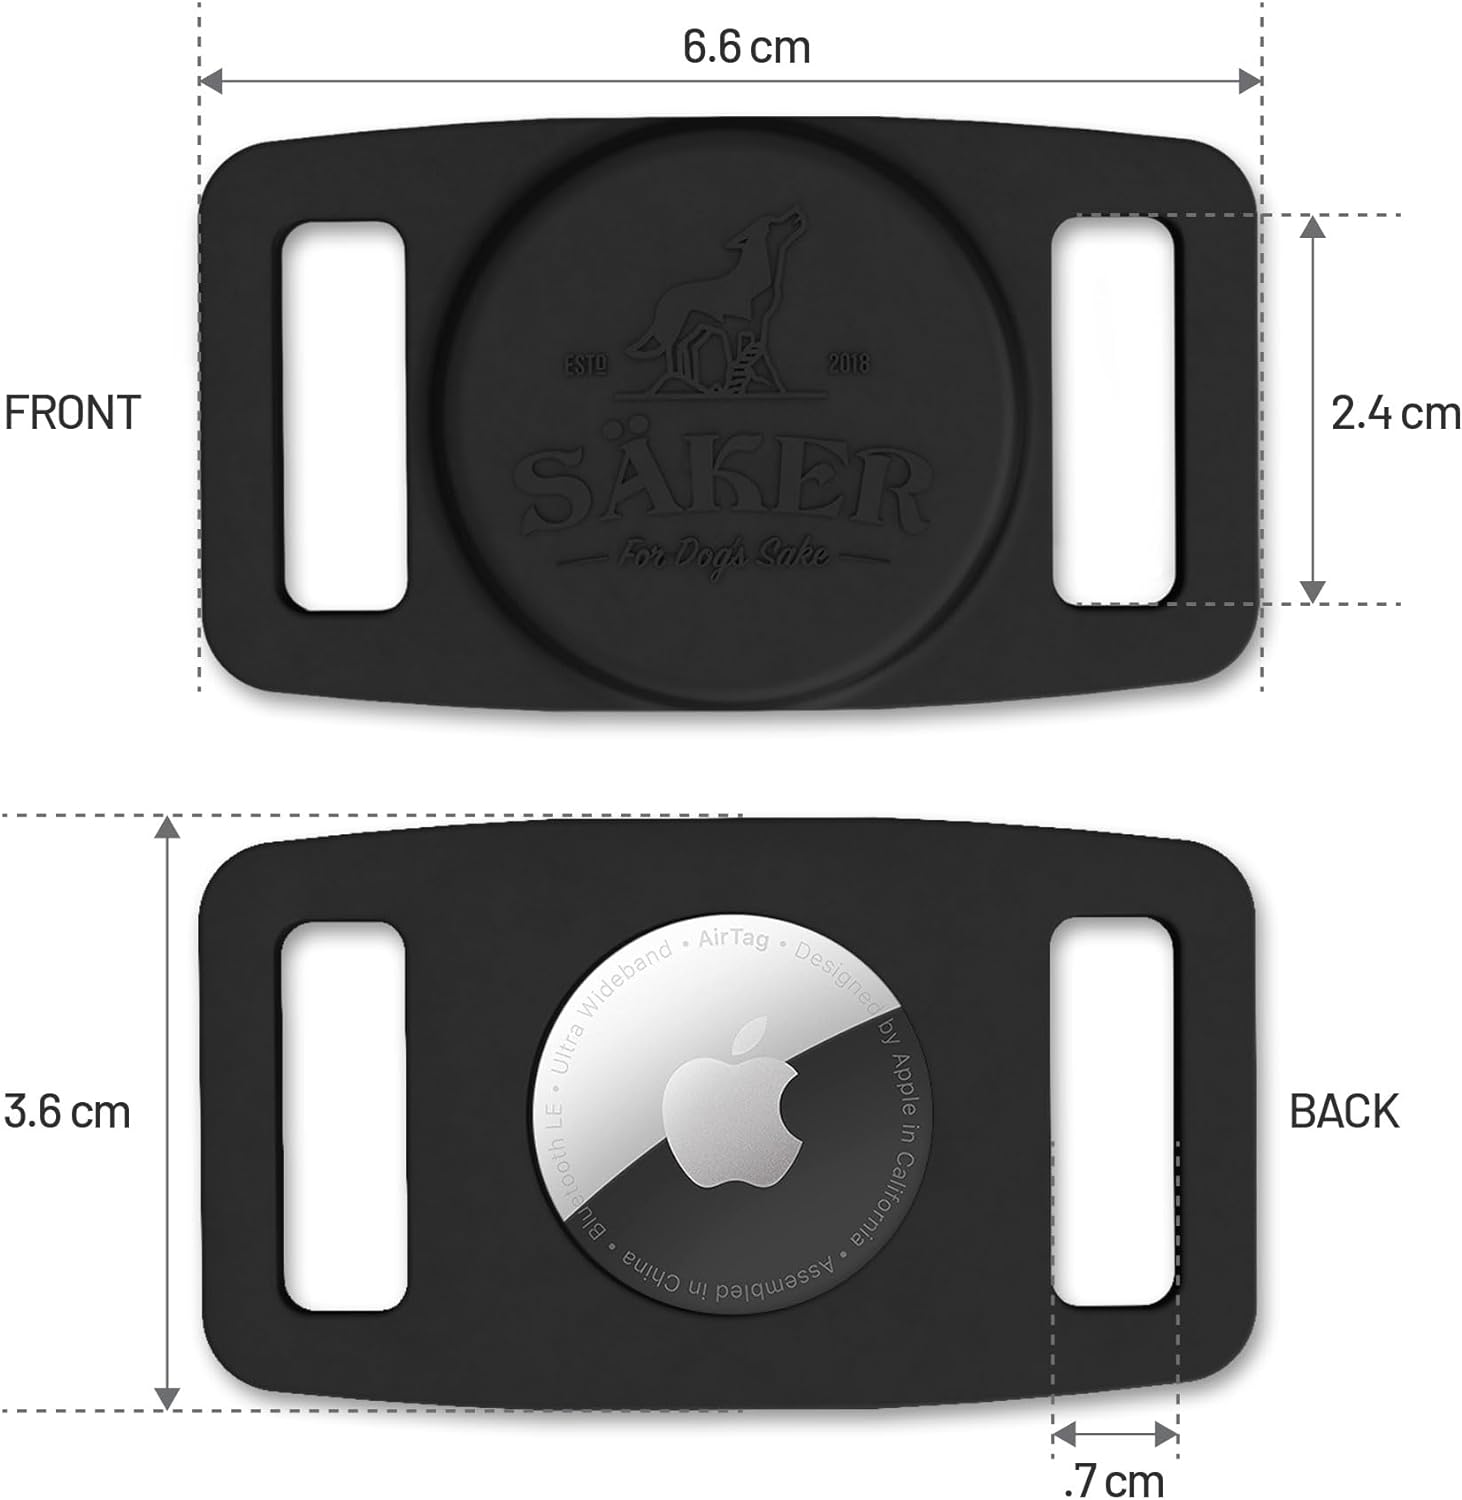 Mammoth Airtag Dog Collar Holder, Strong Dog Airtag Holder is The Perfect Way to GPS Track Your Dog | Uses Apple Technology to Keep Track of Your Dog | Will Not Damage Your Collar - Black (2-Pack)